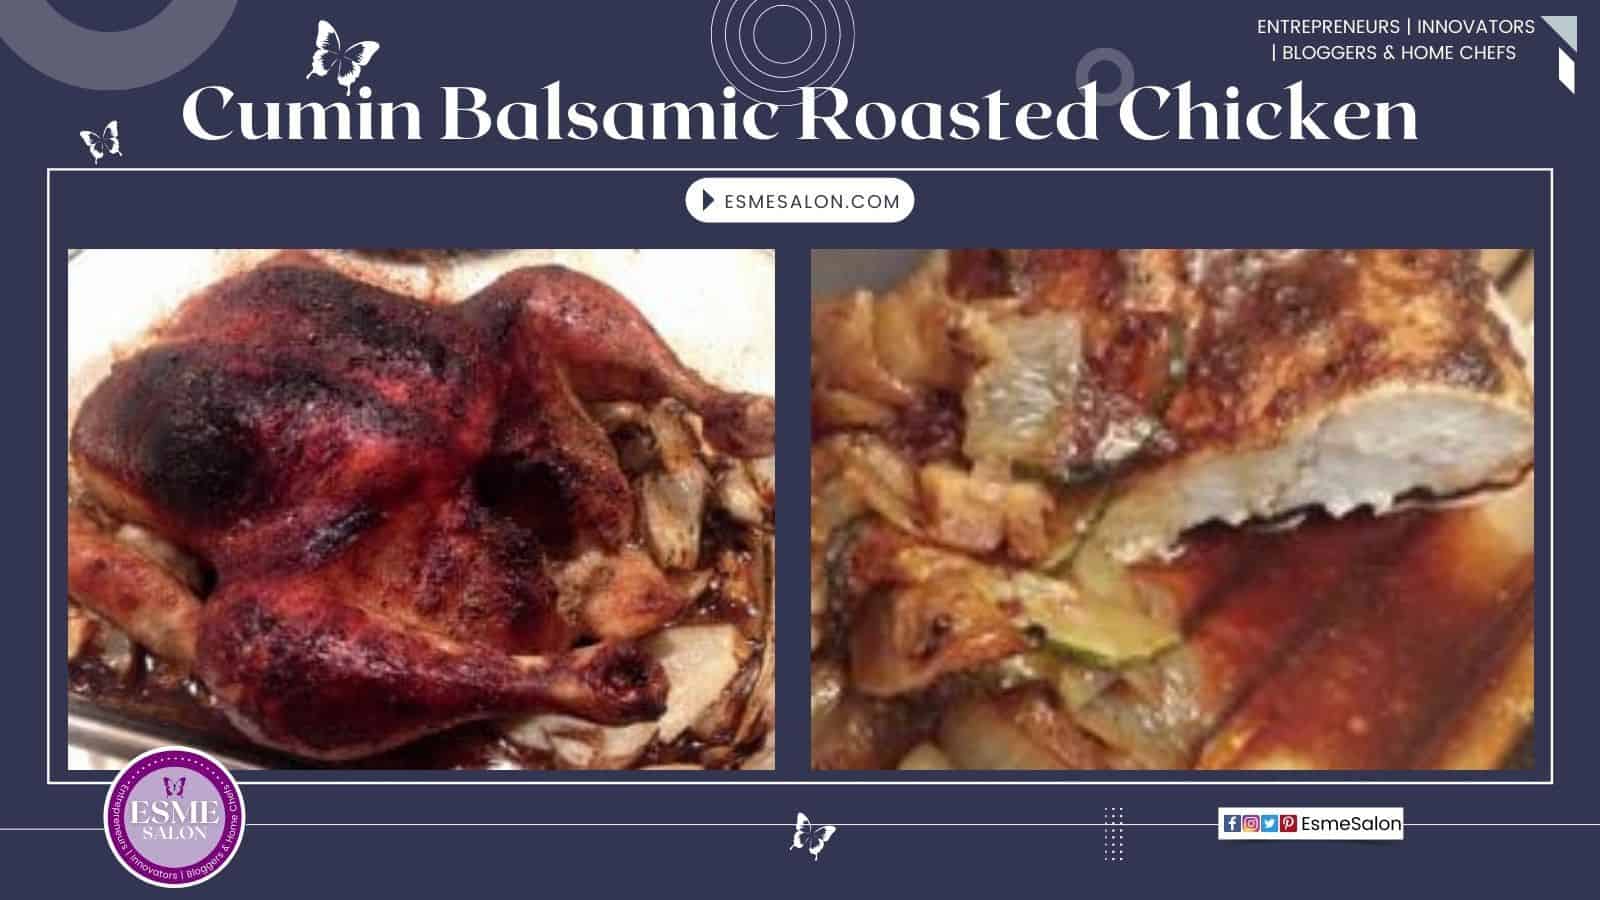 An image of a whole Cumin Balsamic Roasted Chicken